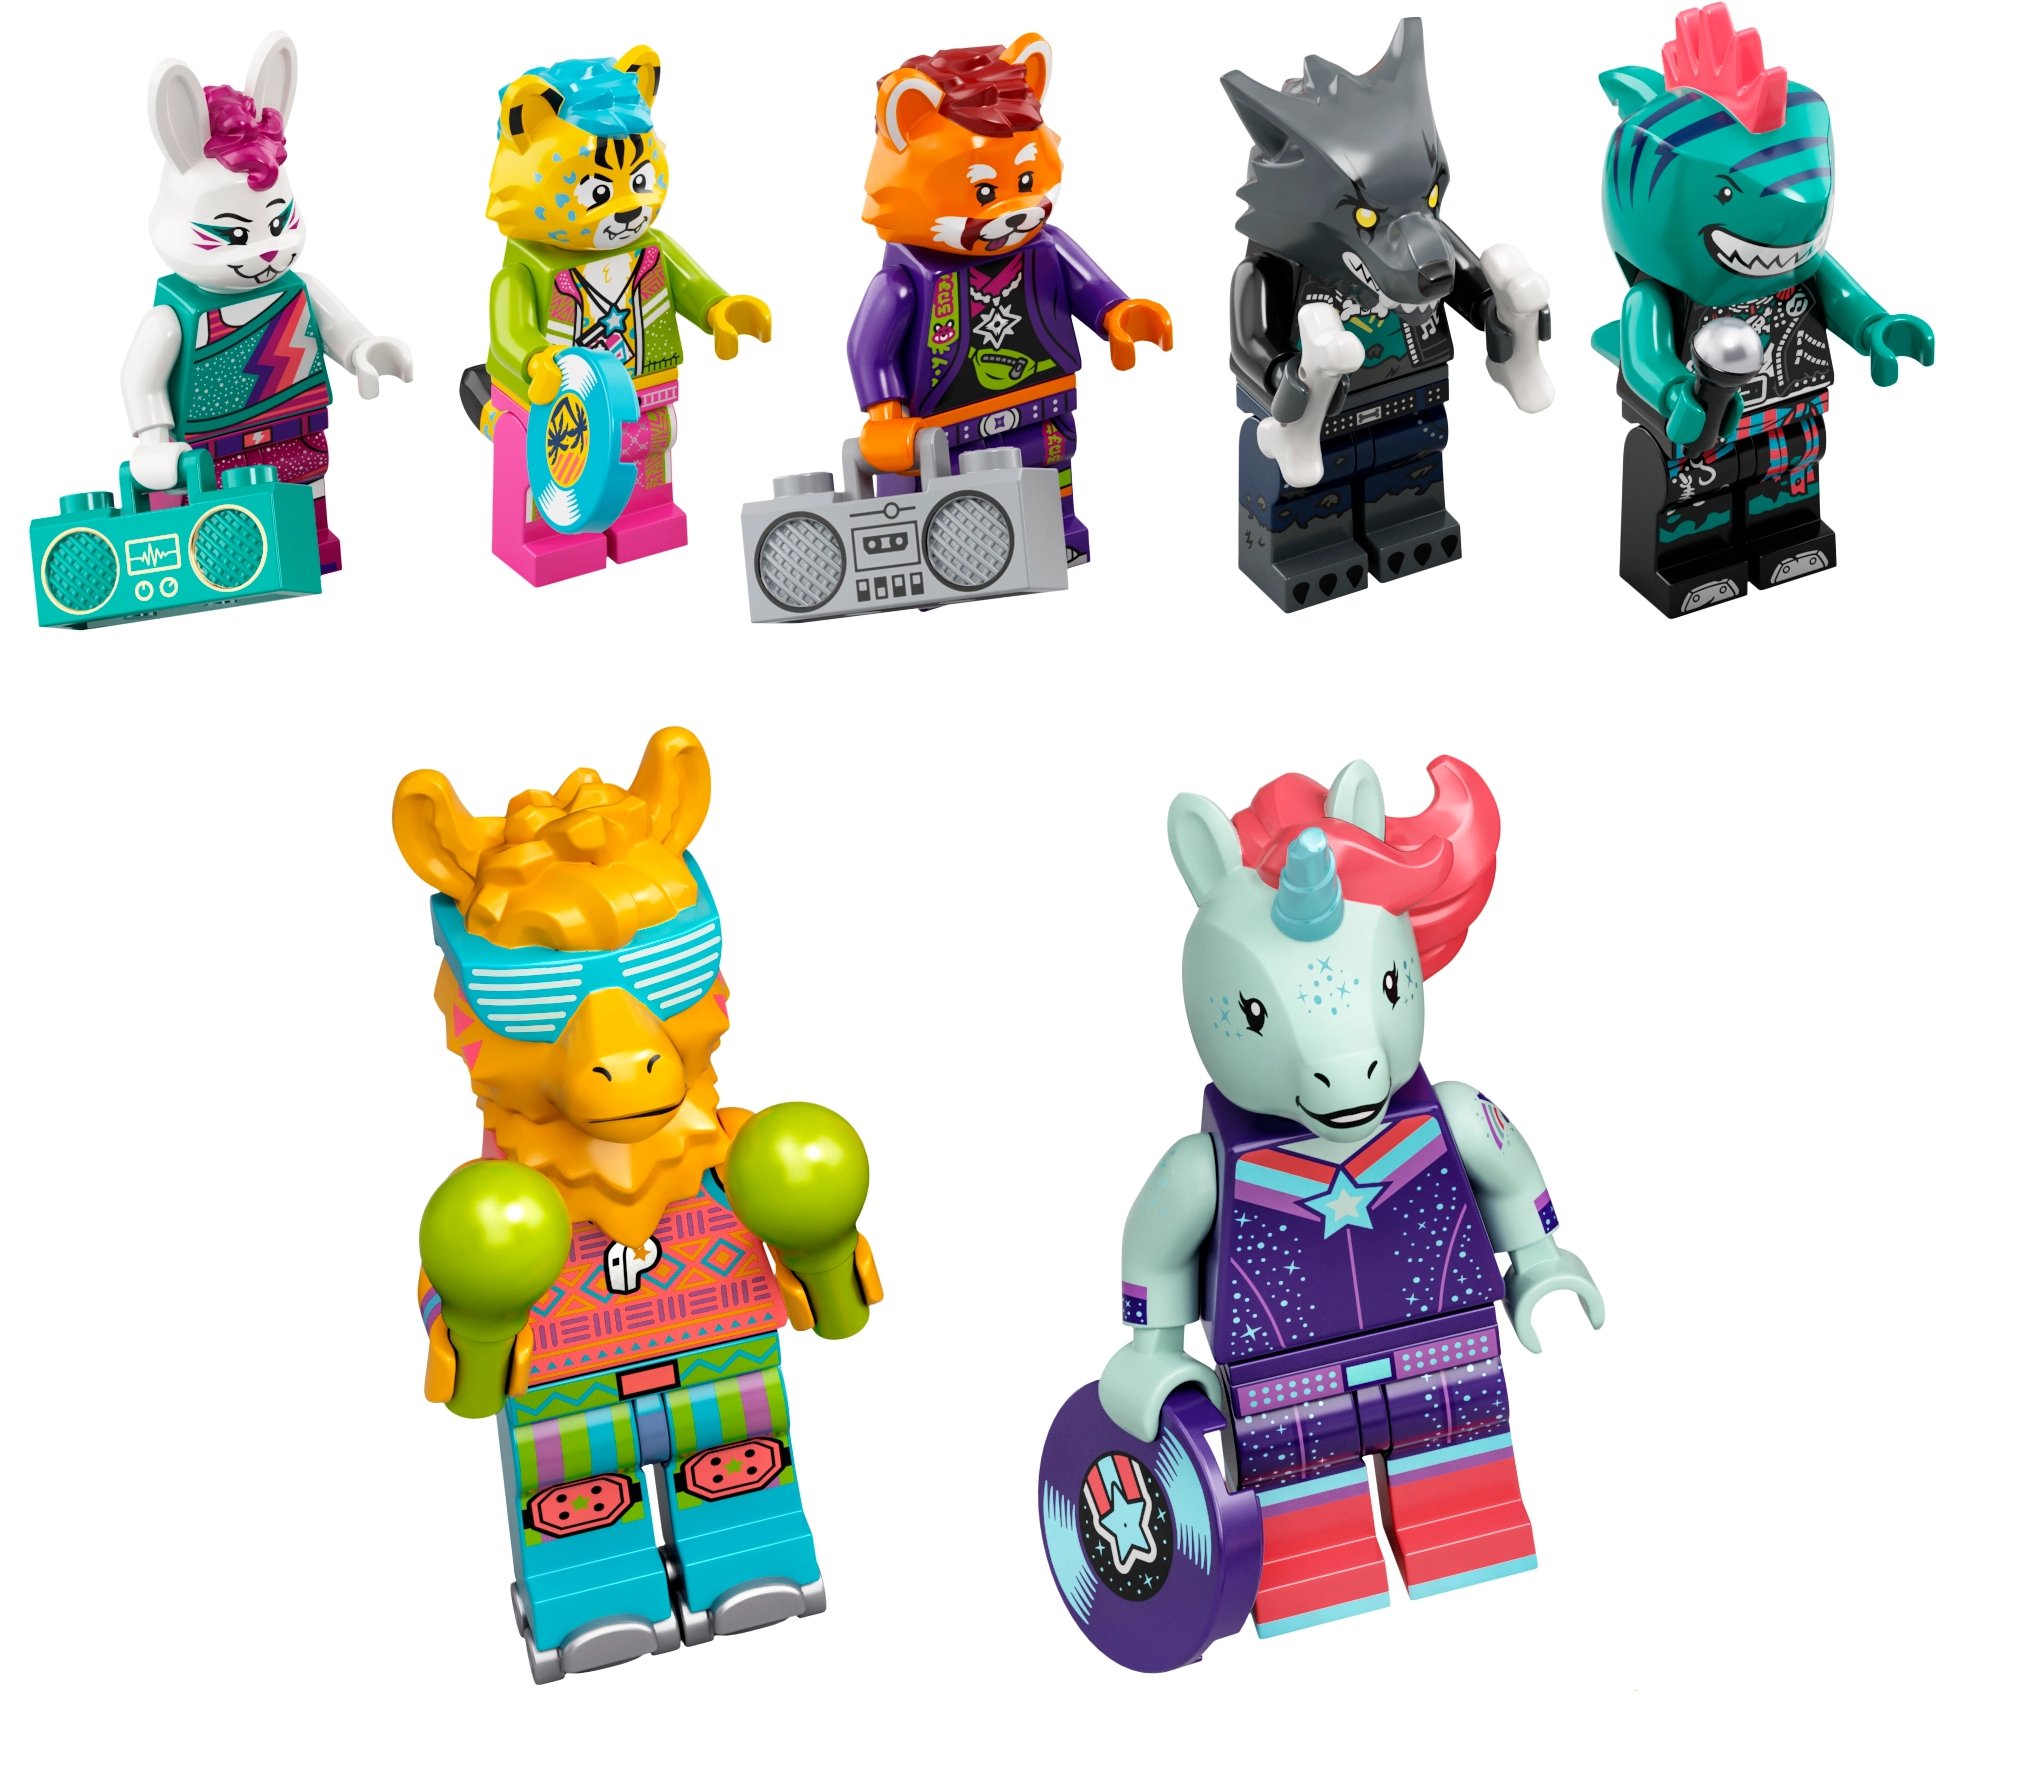 Bobby Schroeder on Twitter: "okay i kinda dig these new lego furries from the overpriced to life music video app thing they're doing to tiktok zoomers or whatever https://t.co/GzUwXXzPq5" /